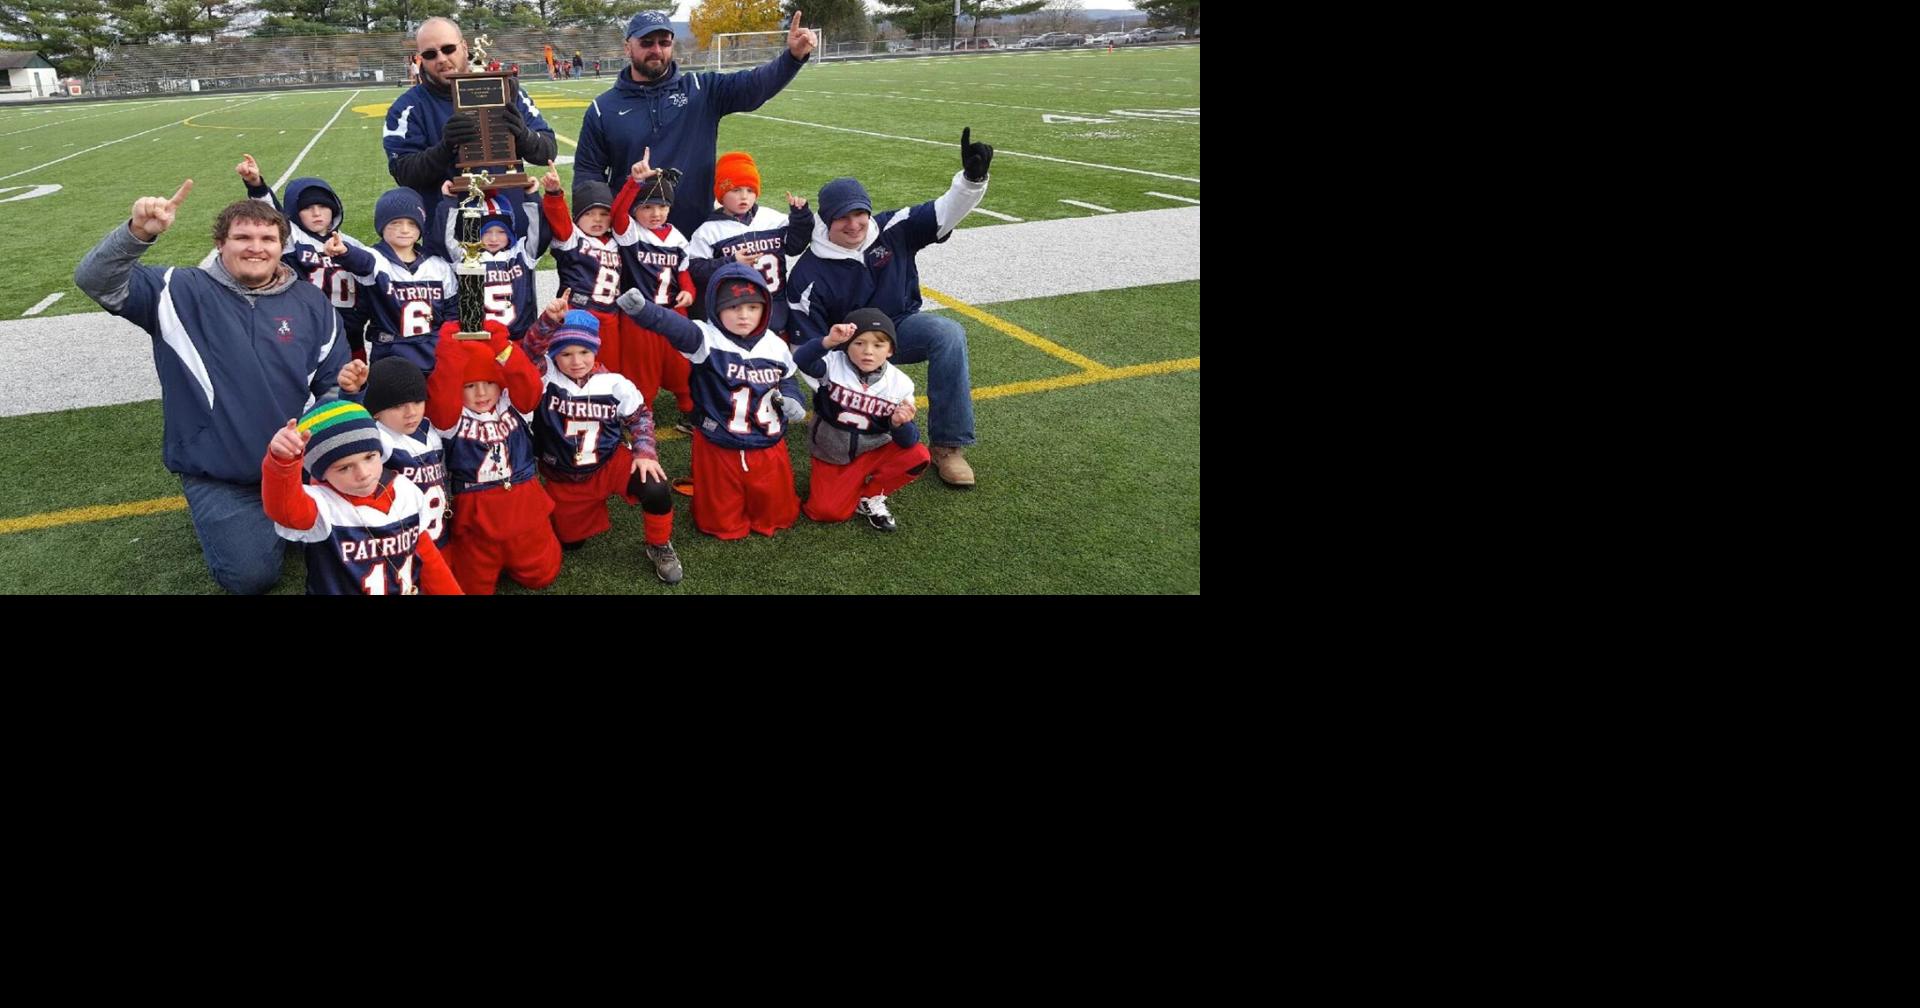 New River Patriots are champs, Sports